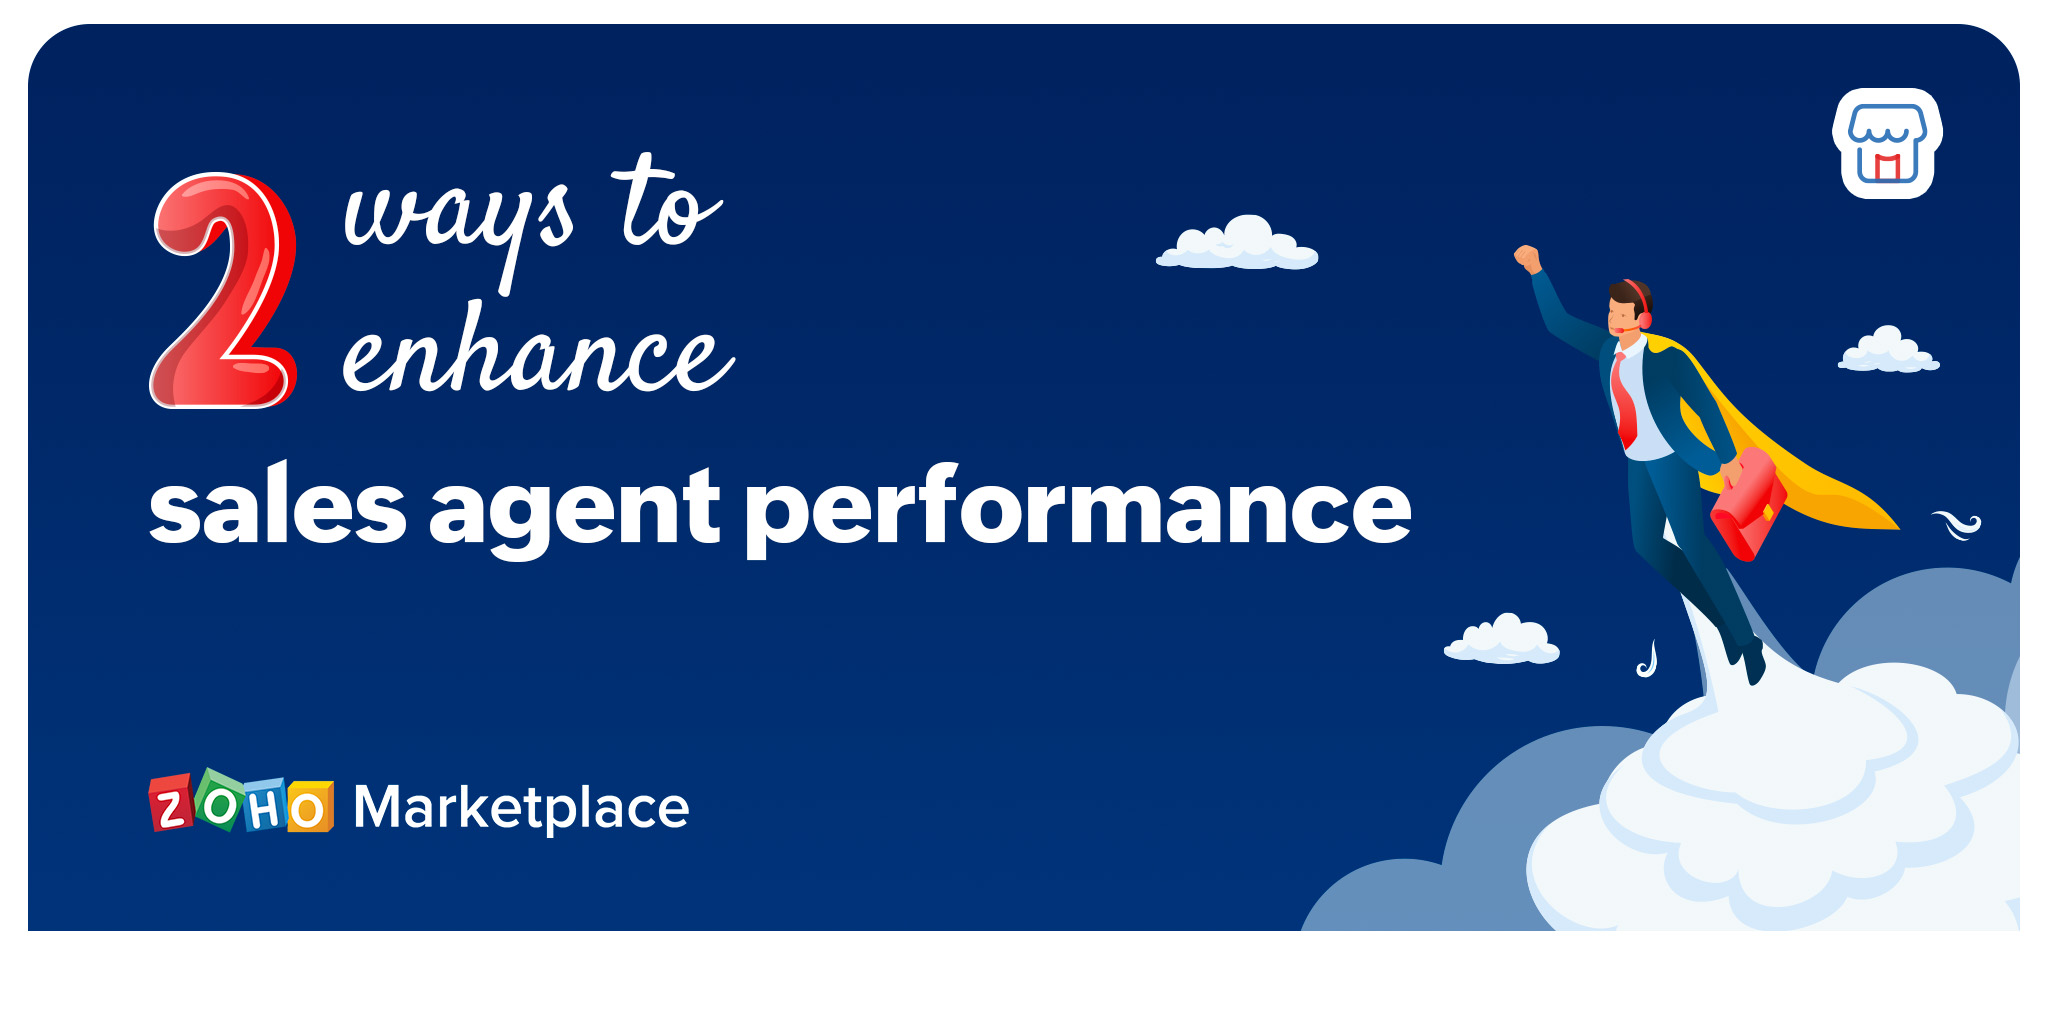 Two ways to enhance sales agent performance